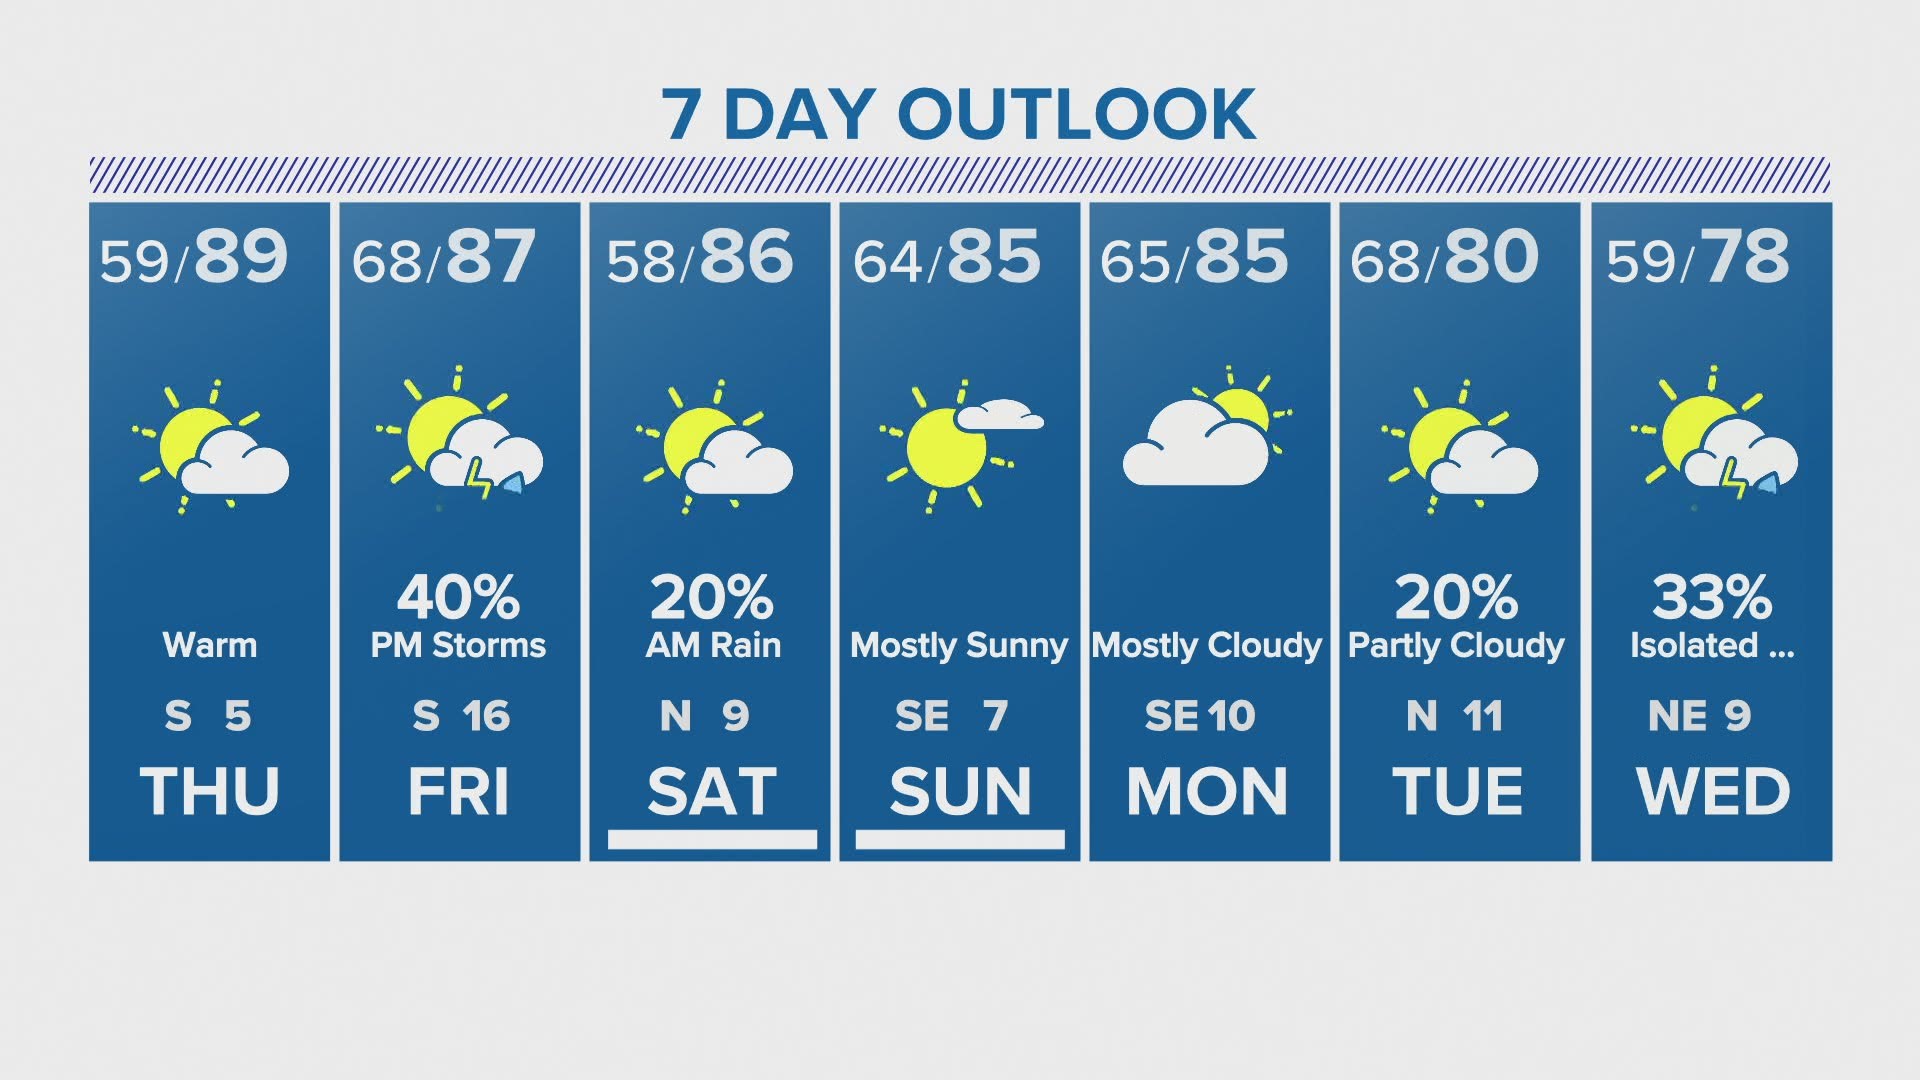 Thursday starts out cool before a warmup by the afternoon where temps could be near 90 degrees, according to KHOU 11 Chief Meteorologist David Paul.